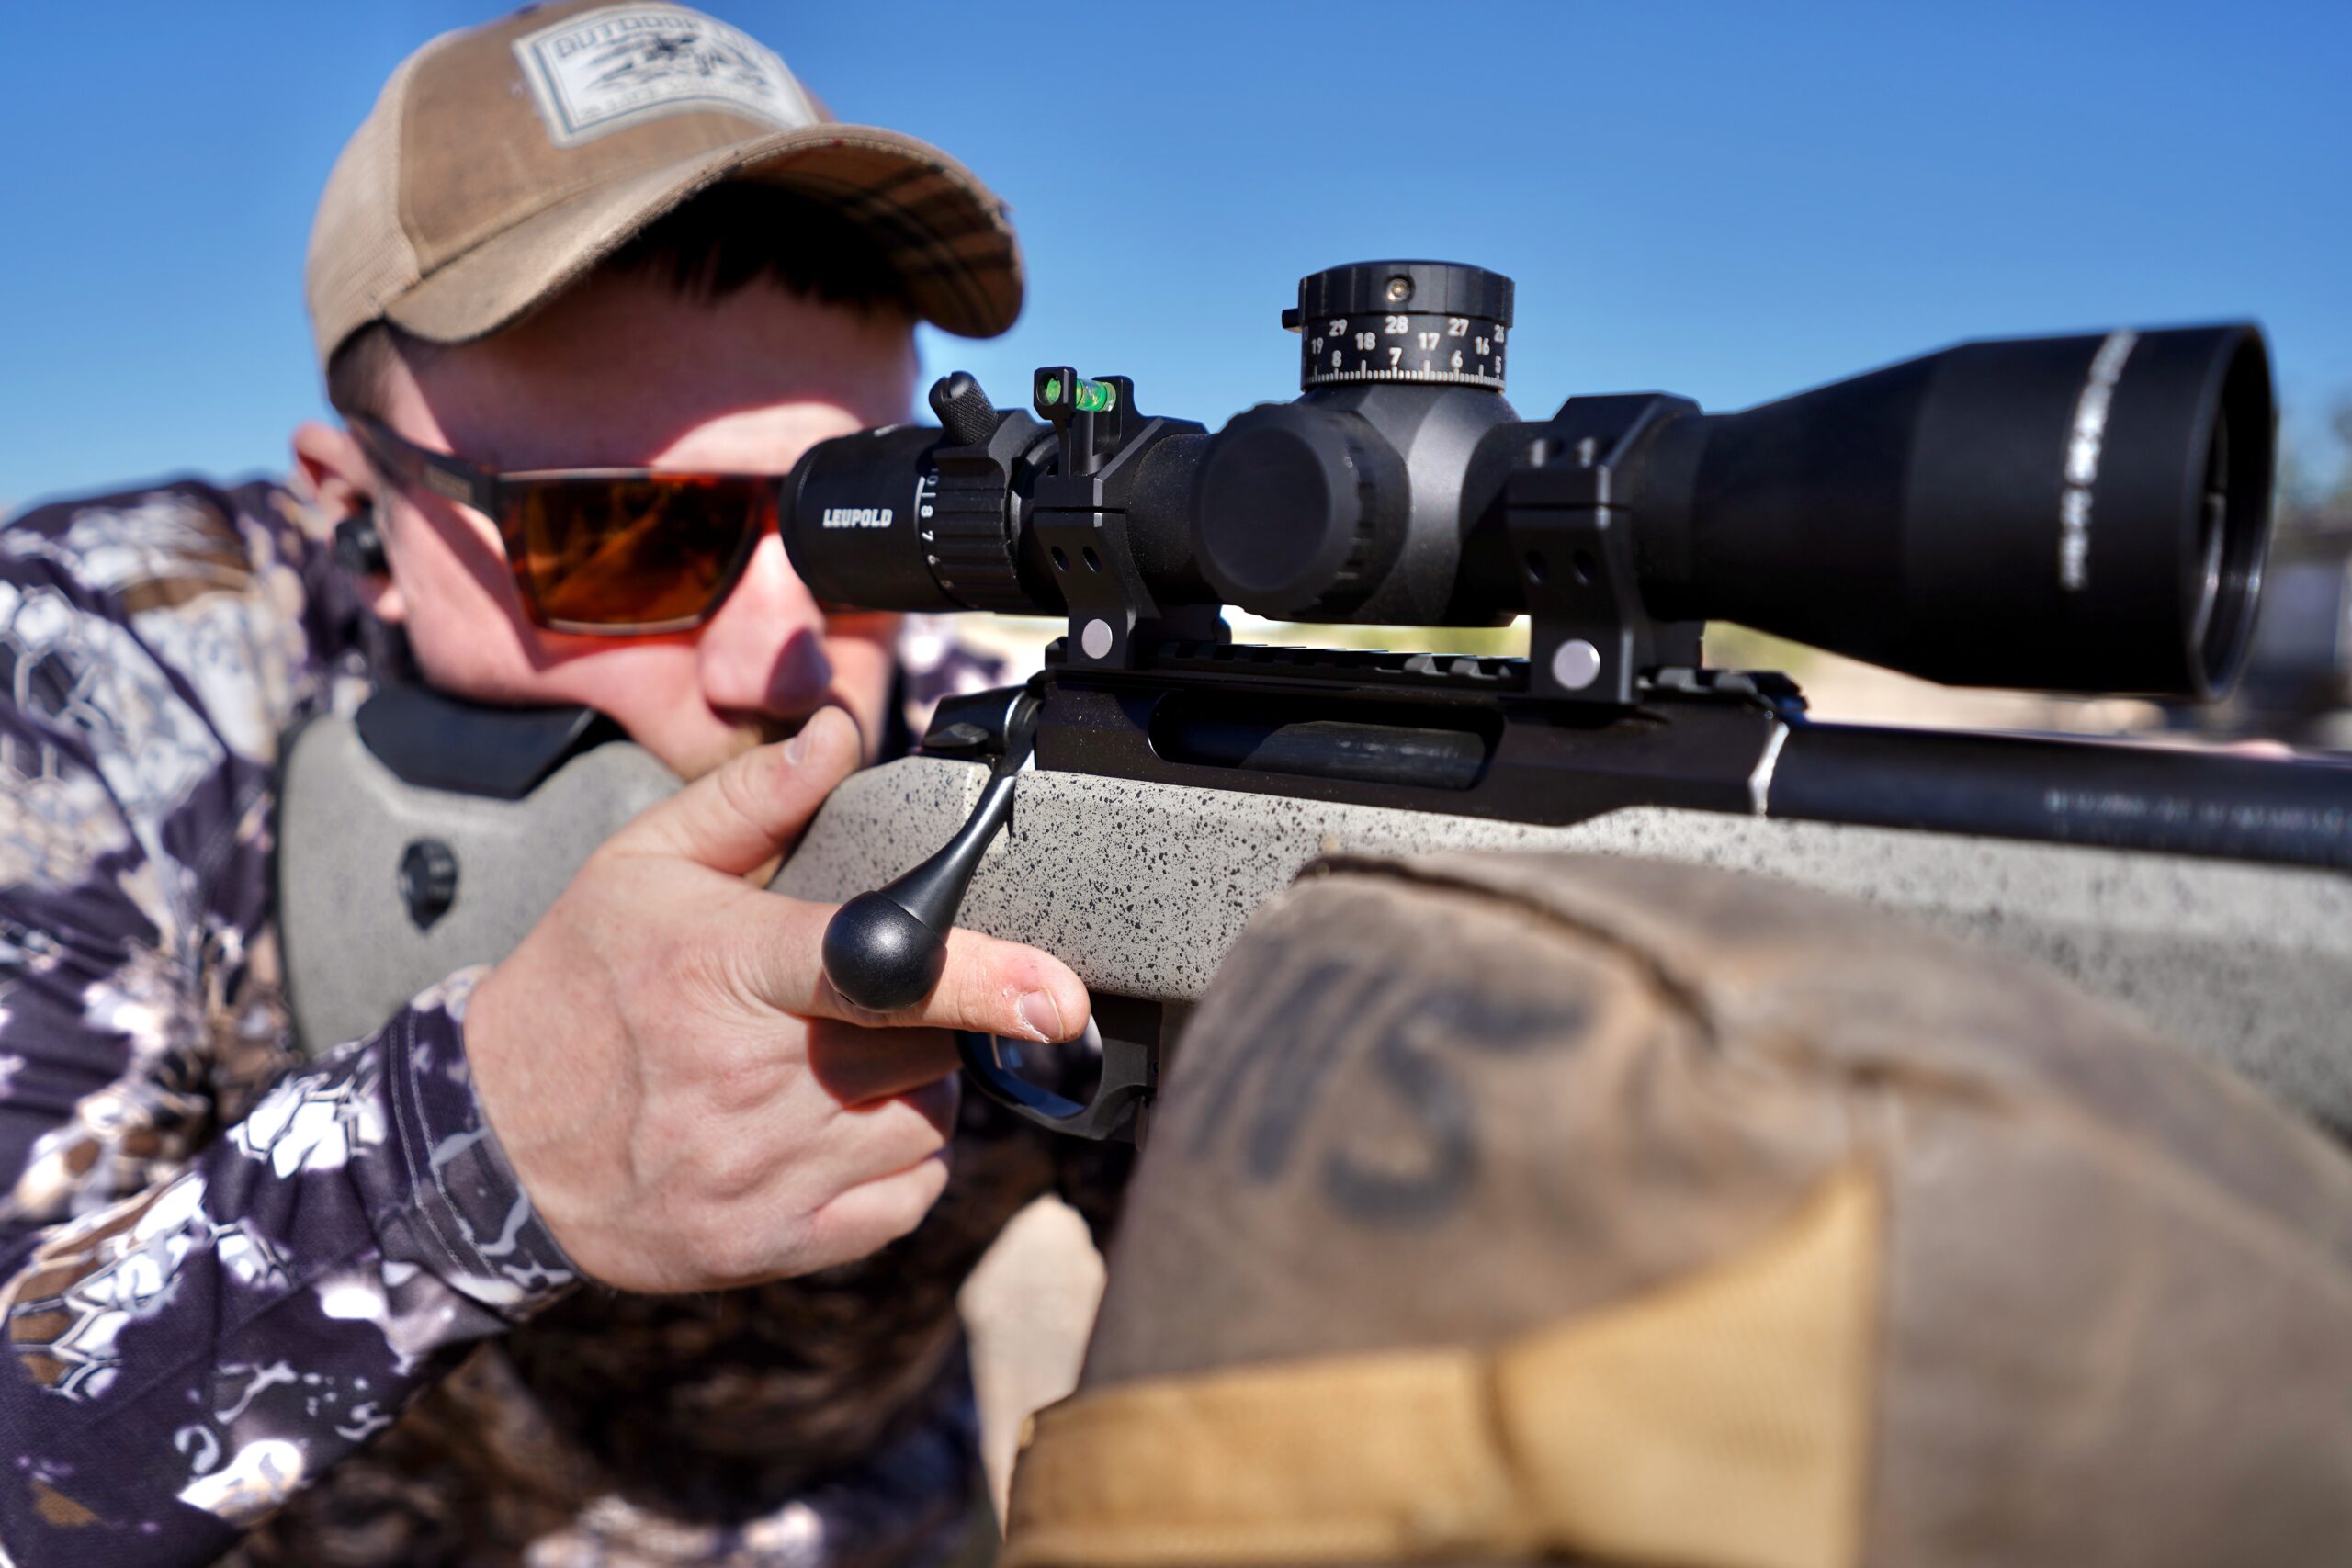 The Tikka T3x UPR is one of the best budget long range rifles